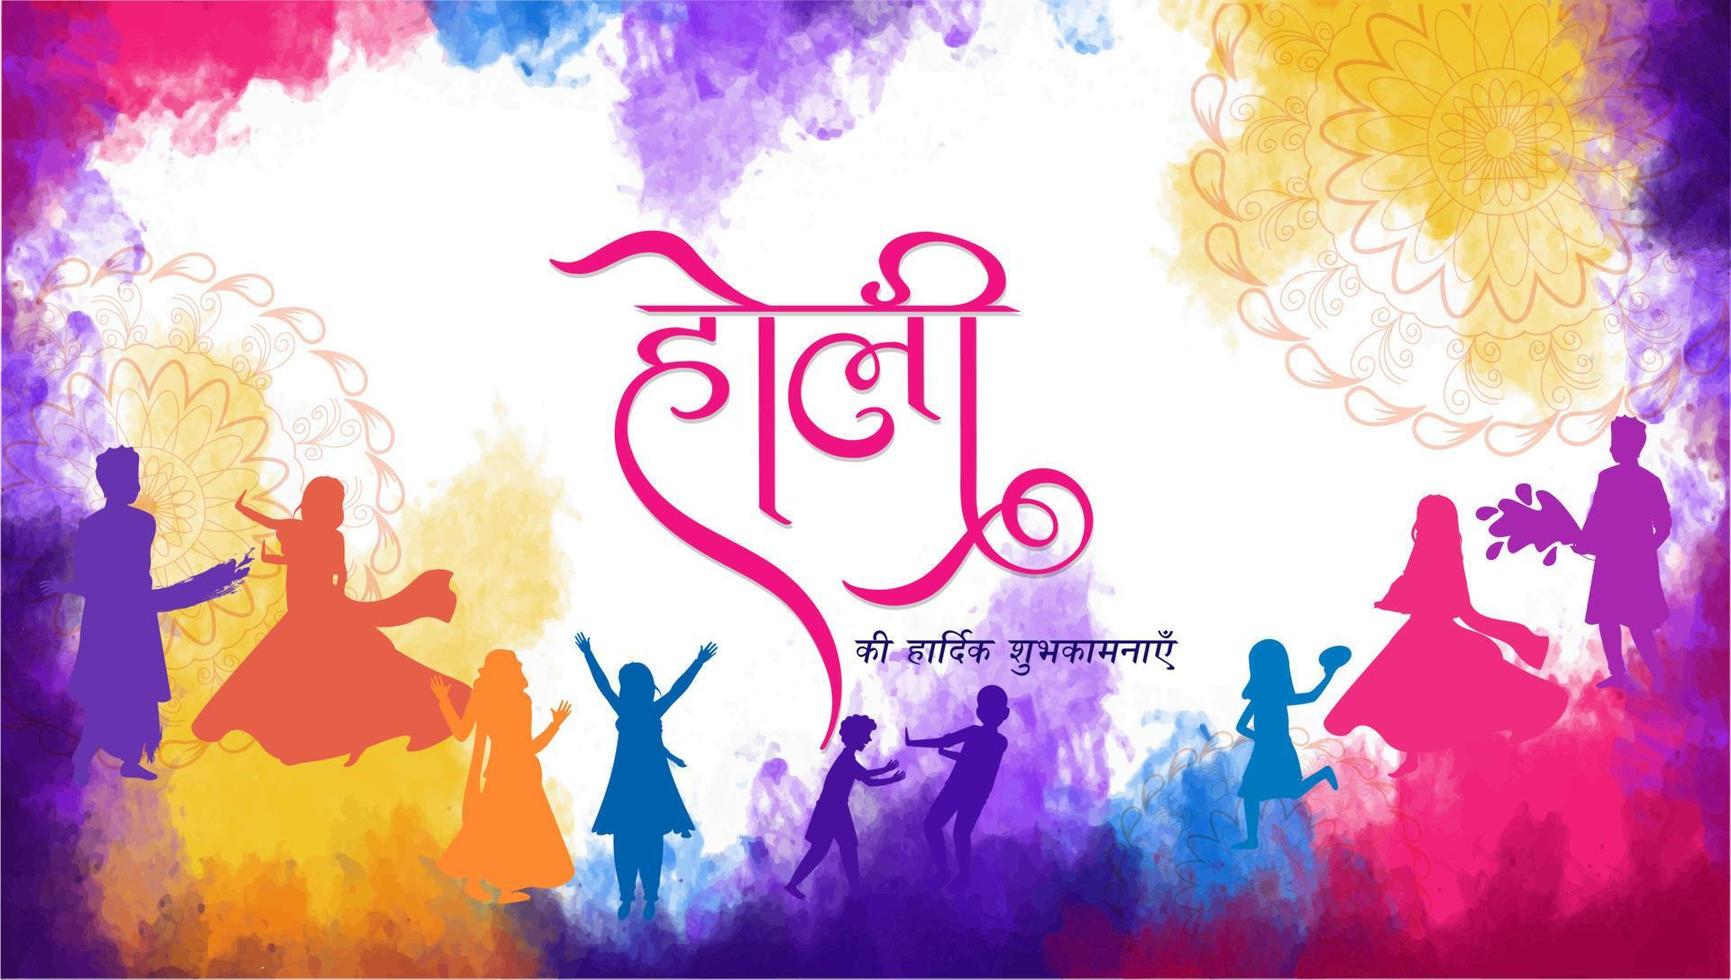 Best Wishes of Holi in Hindi Language and Silhouette of People Celebrating or Enjoying Colors on Watercolor Splash Background. vector